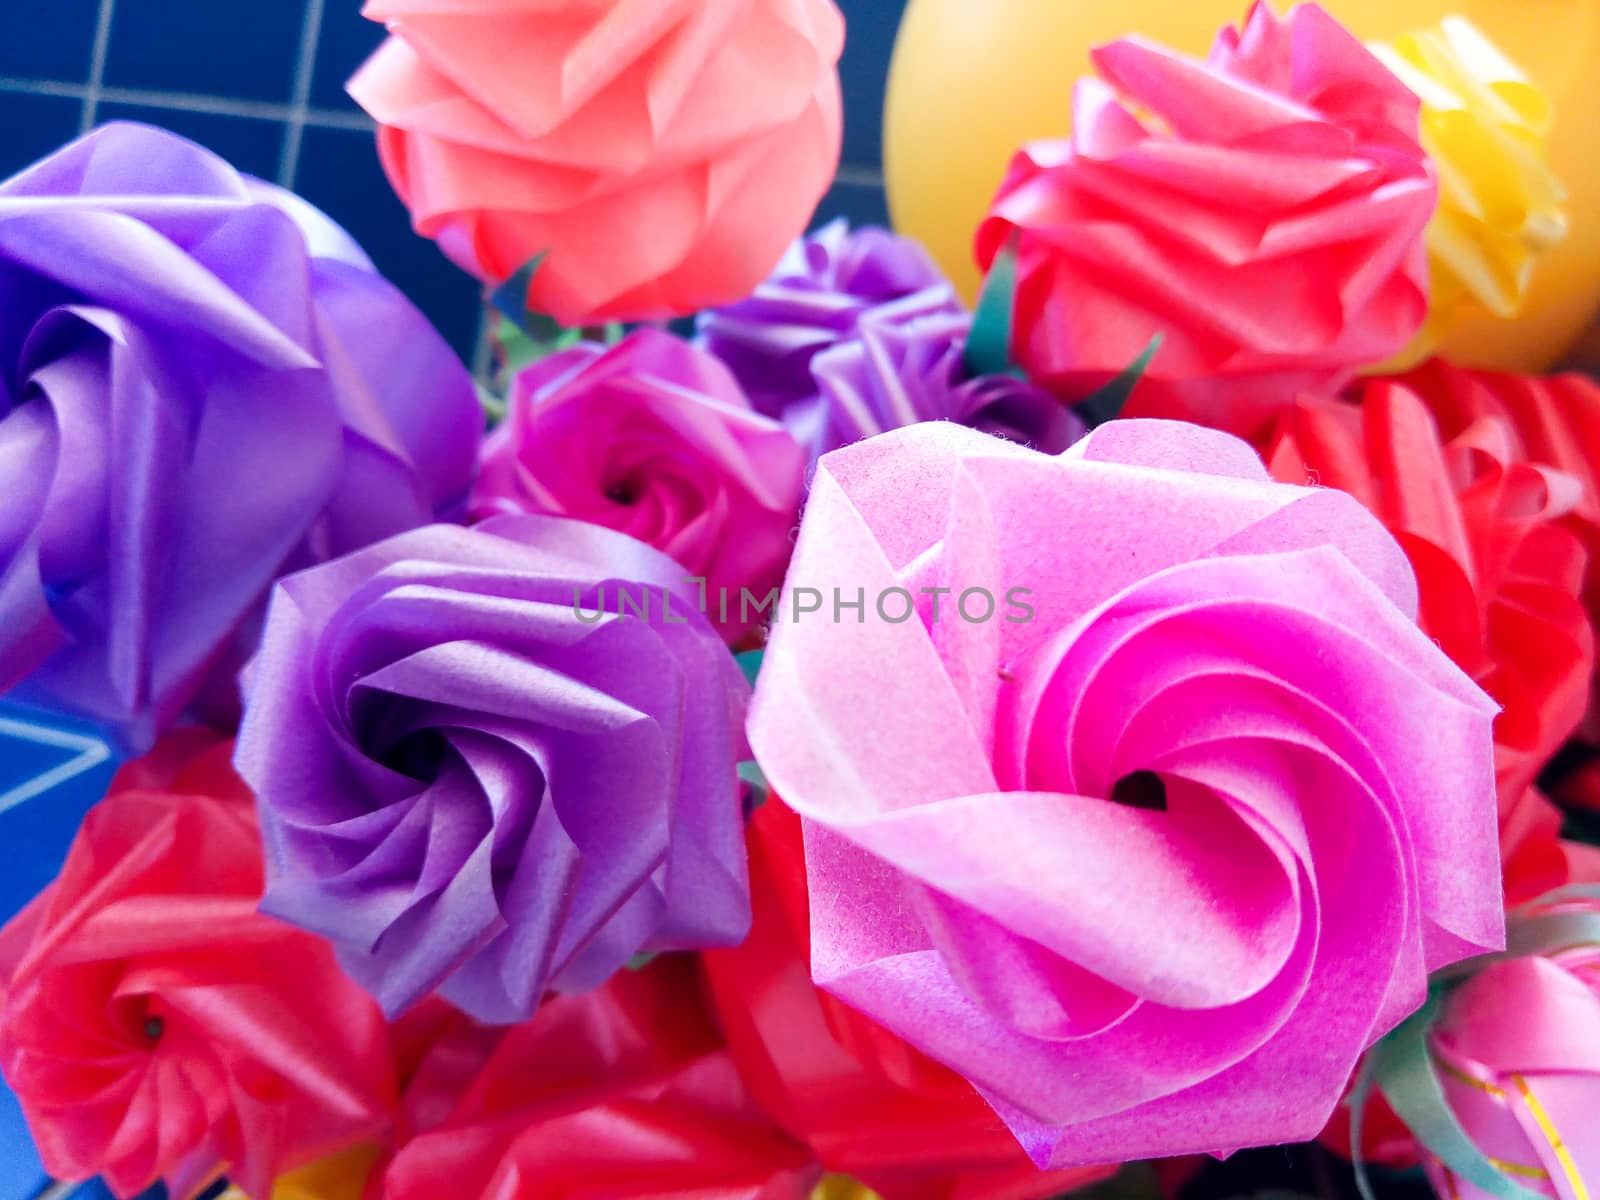 Colorful Fake Rose Flowers by PeachLoveU